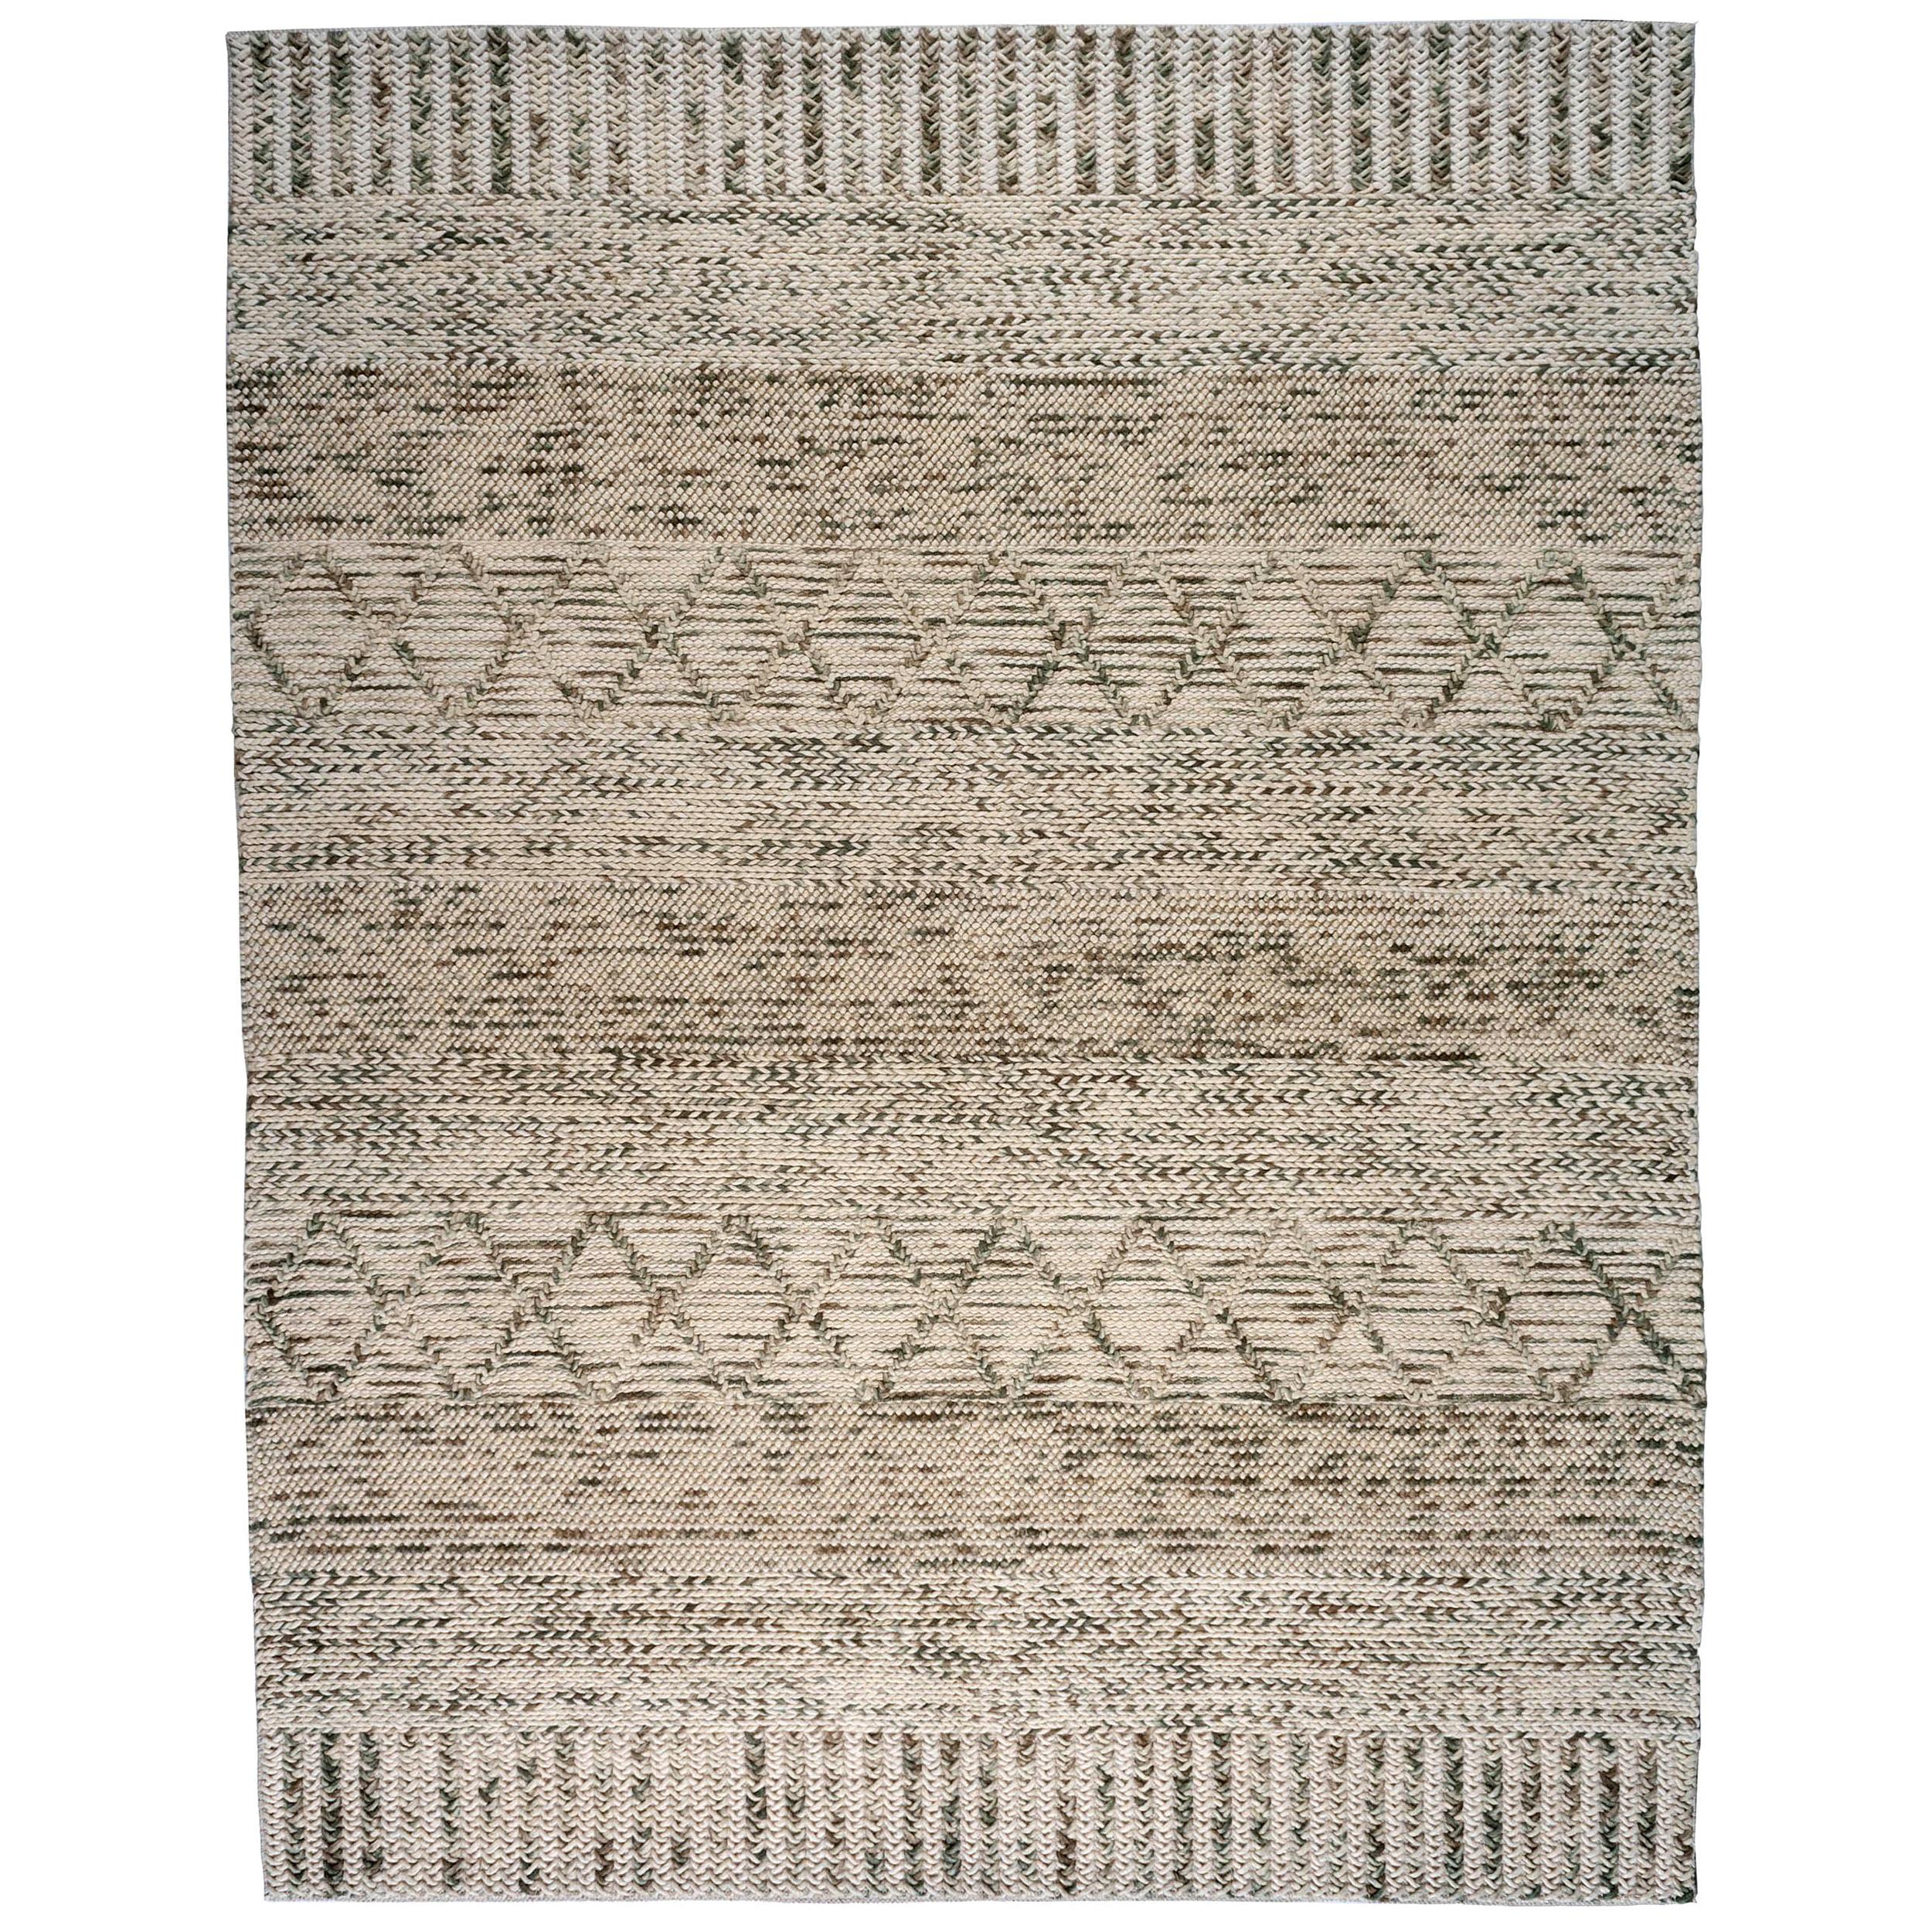 Braided Cream and Grey Area Rug For Sale